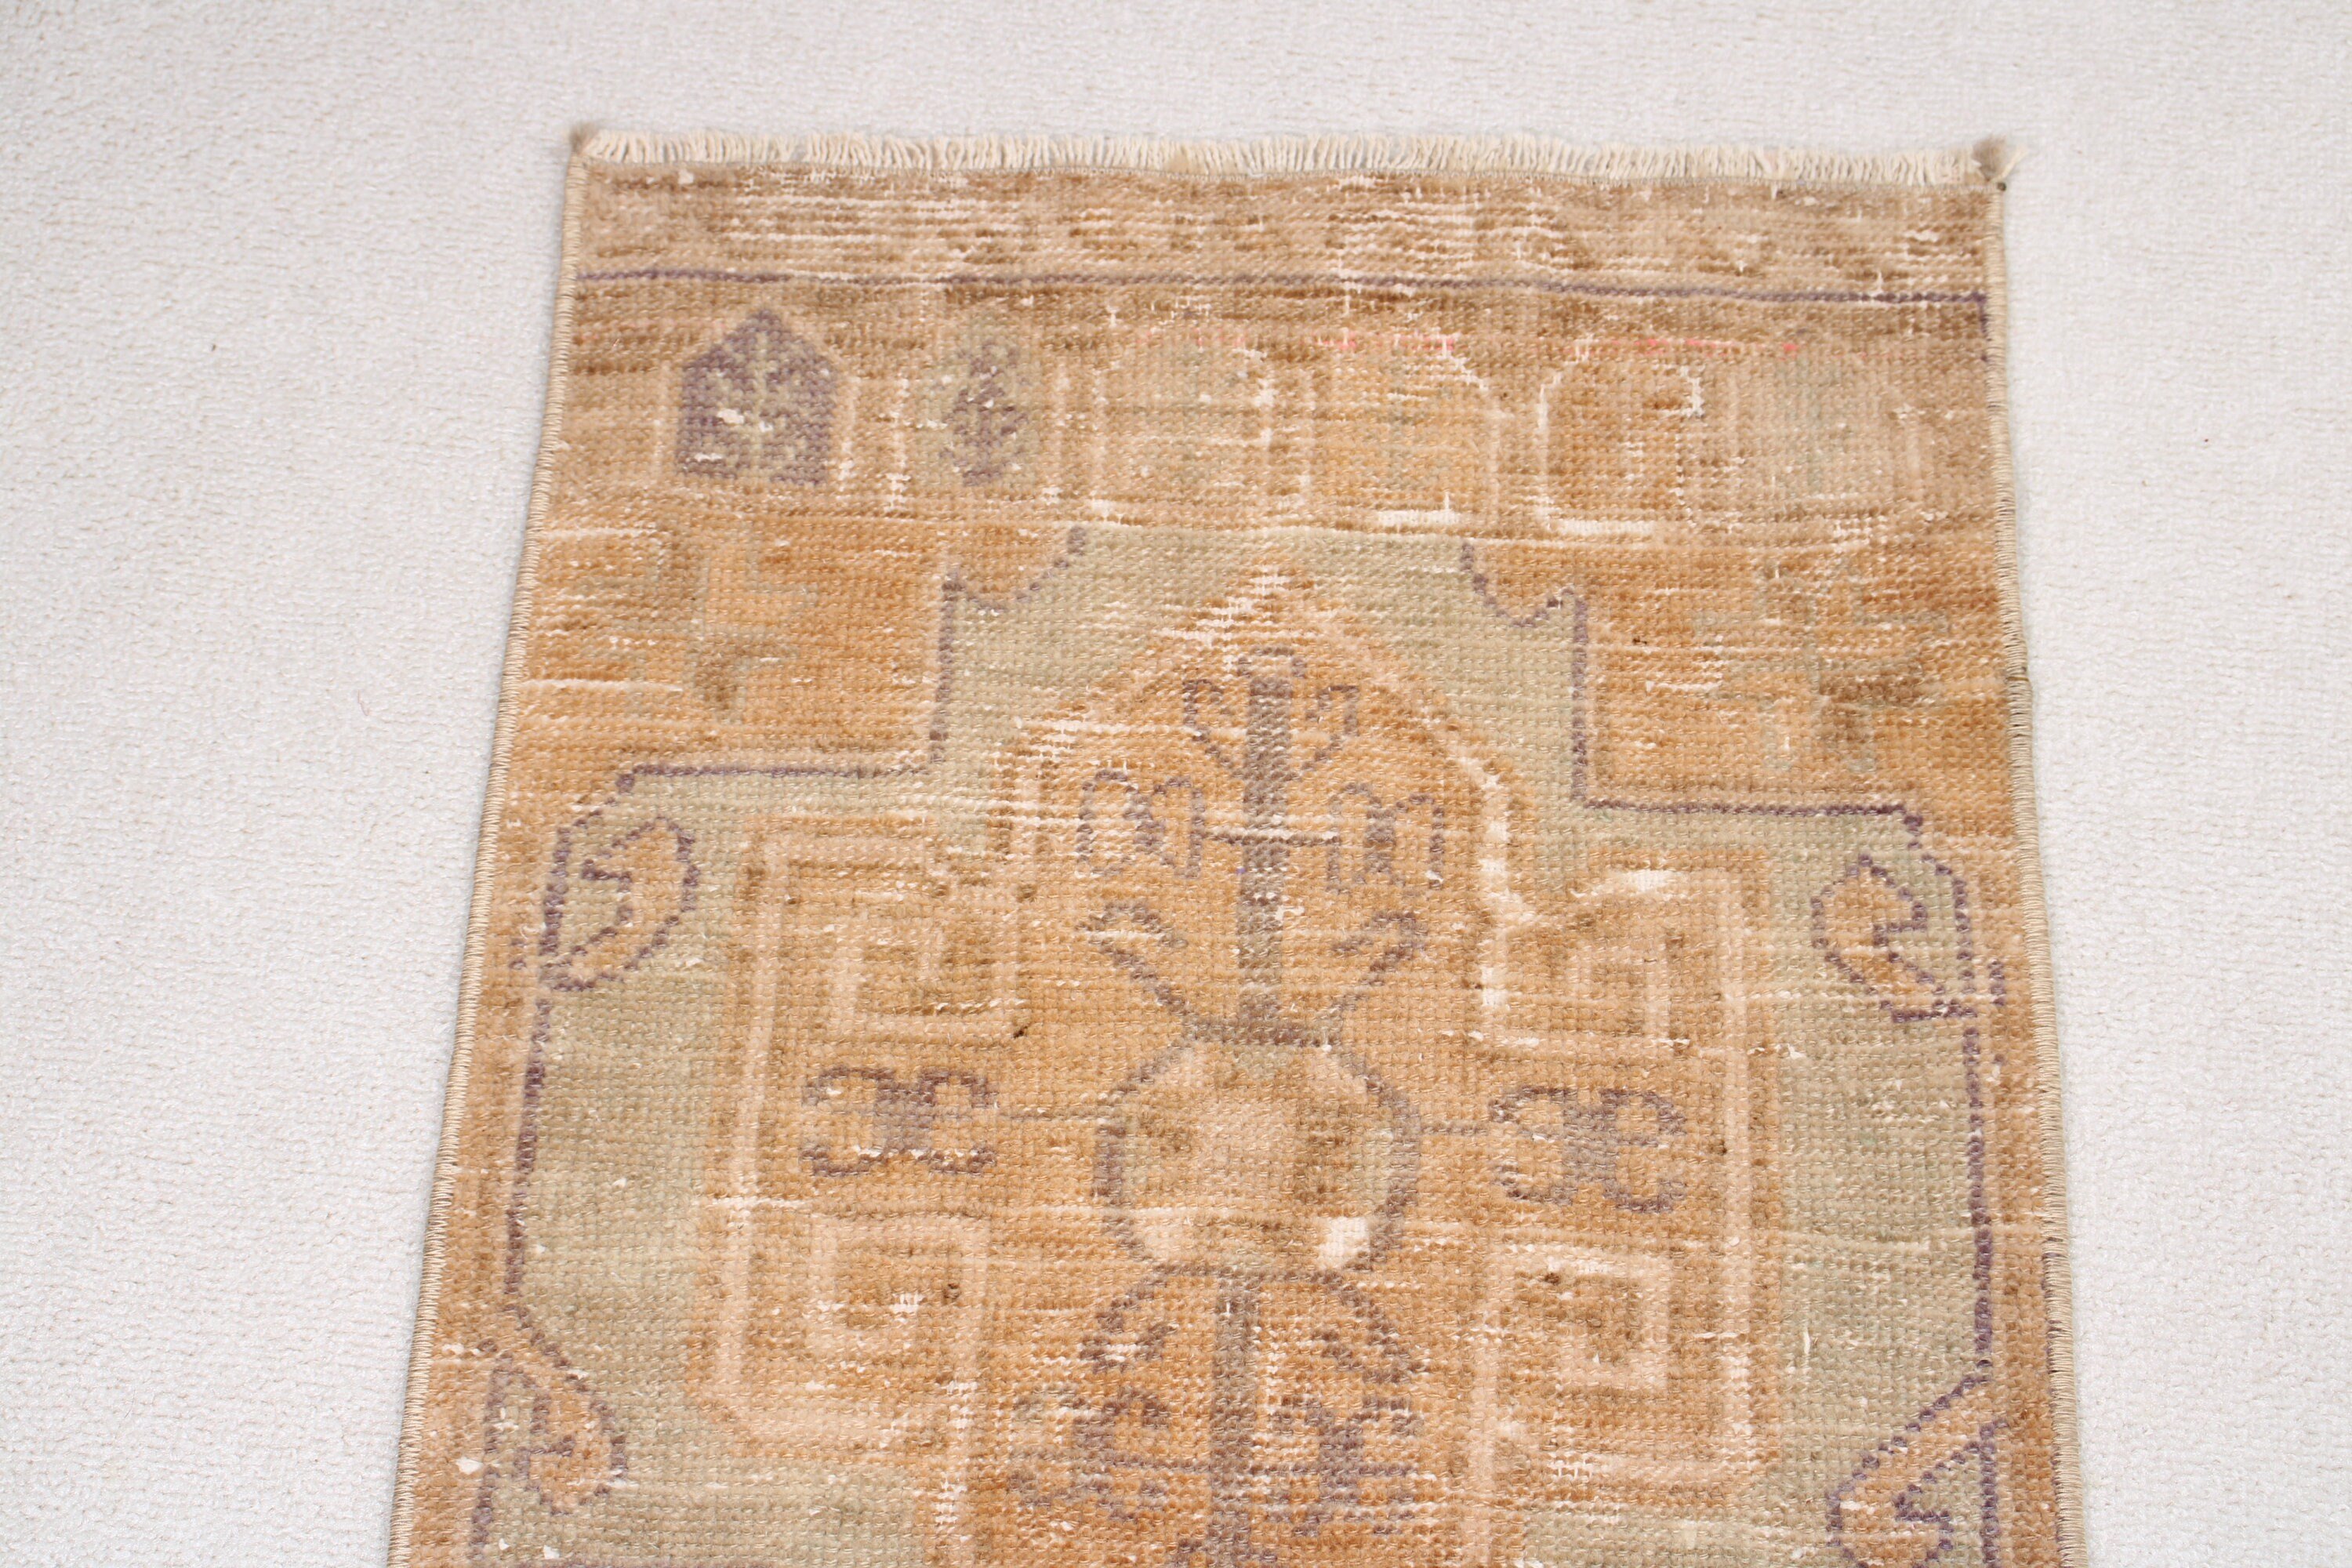 Vintage Rugs, Pale Rug, Anatolian Rug, 1.4x3.5 ft Small Rugs, Kitchen Rug, Antique Rugs, Rugs for Door Mat, Turkish Rug, Brown Bedroom Rug